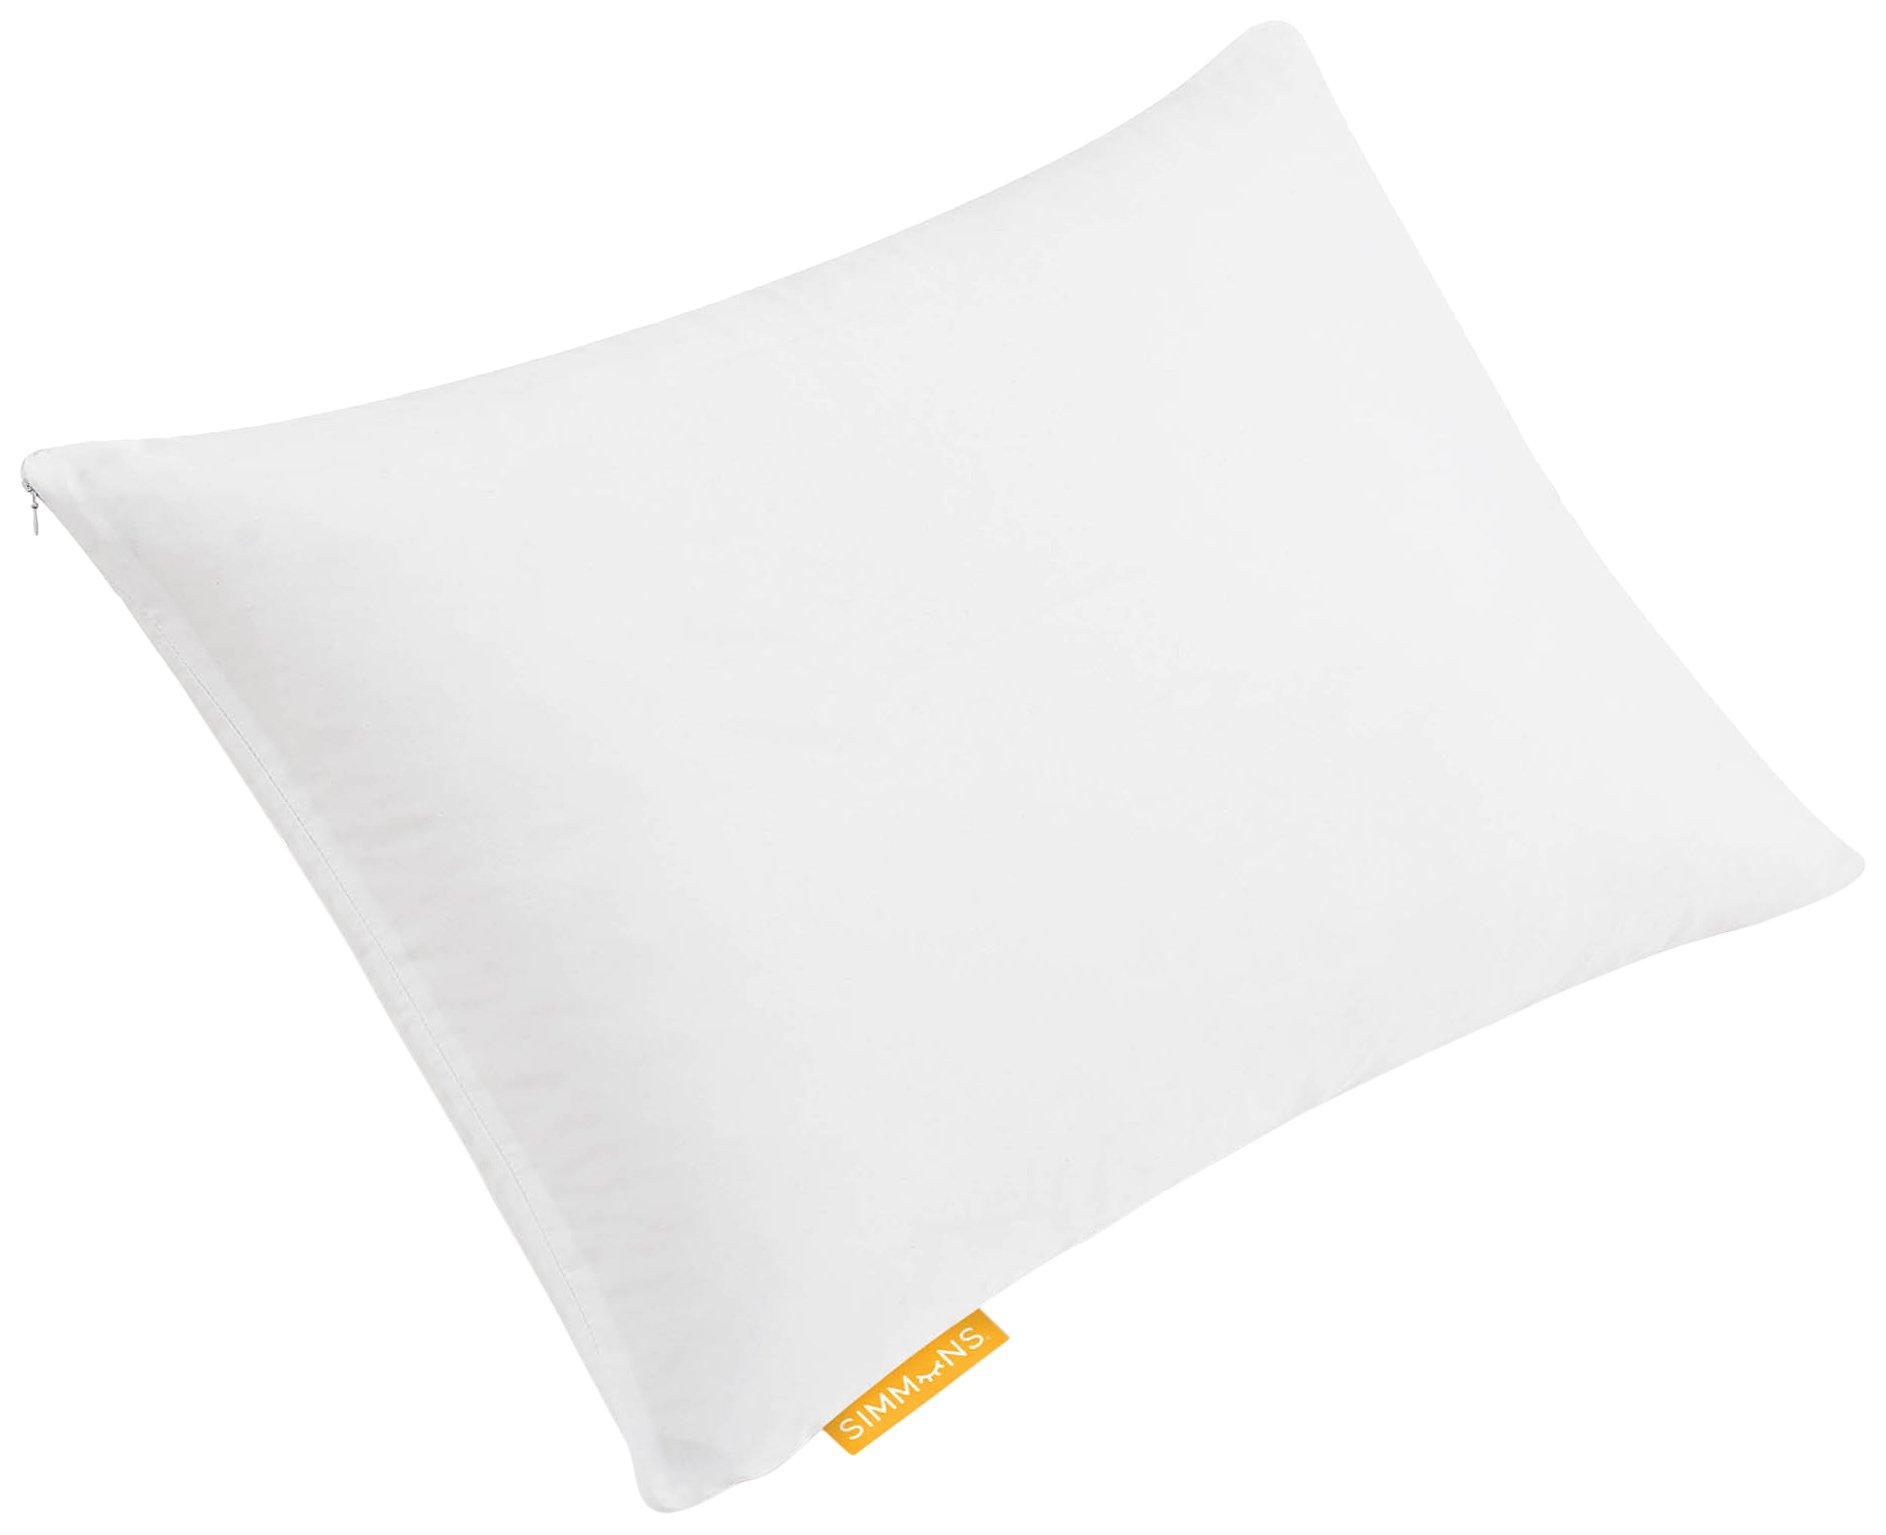 Simmons Moisture Wicking Pillow Cover